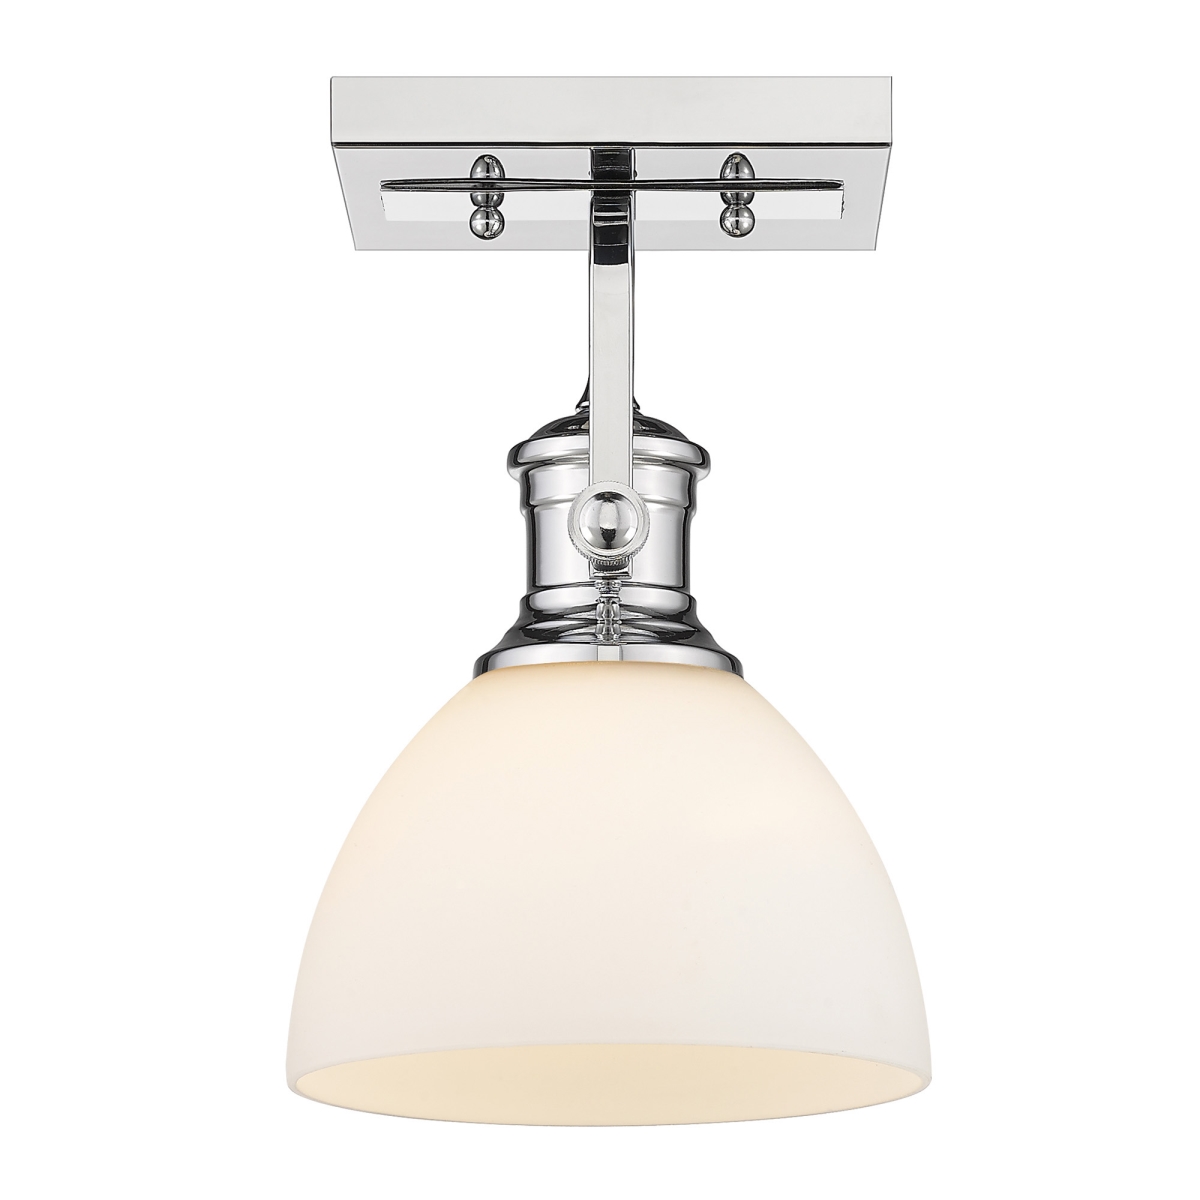 3118-1sf Ch-op Hines 1 Light In Chrome With Opal Glass